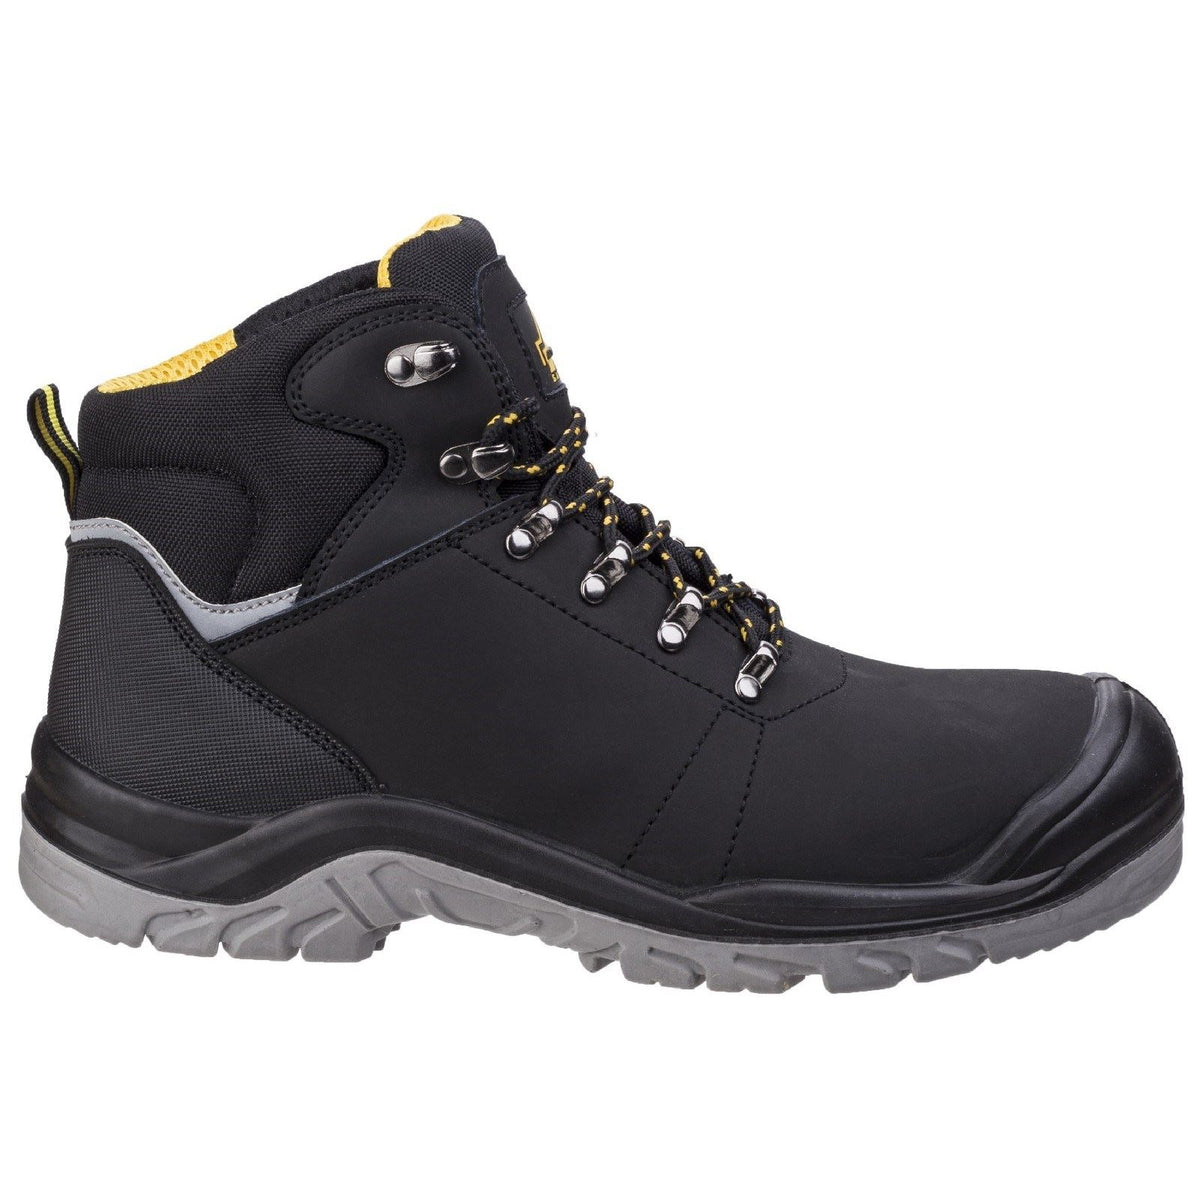 Amblers Safety AS252 Lightweight Water Resistant Leather Safety Boots